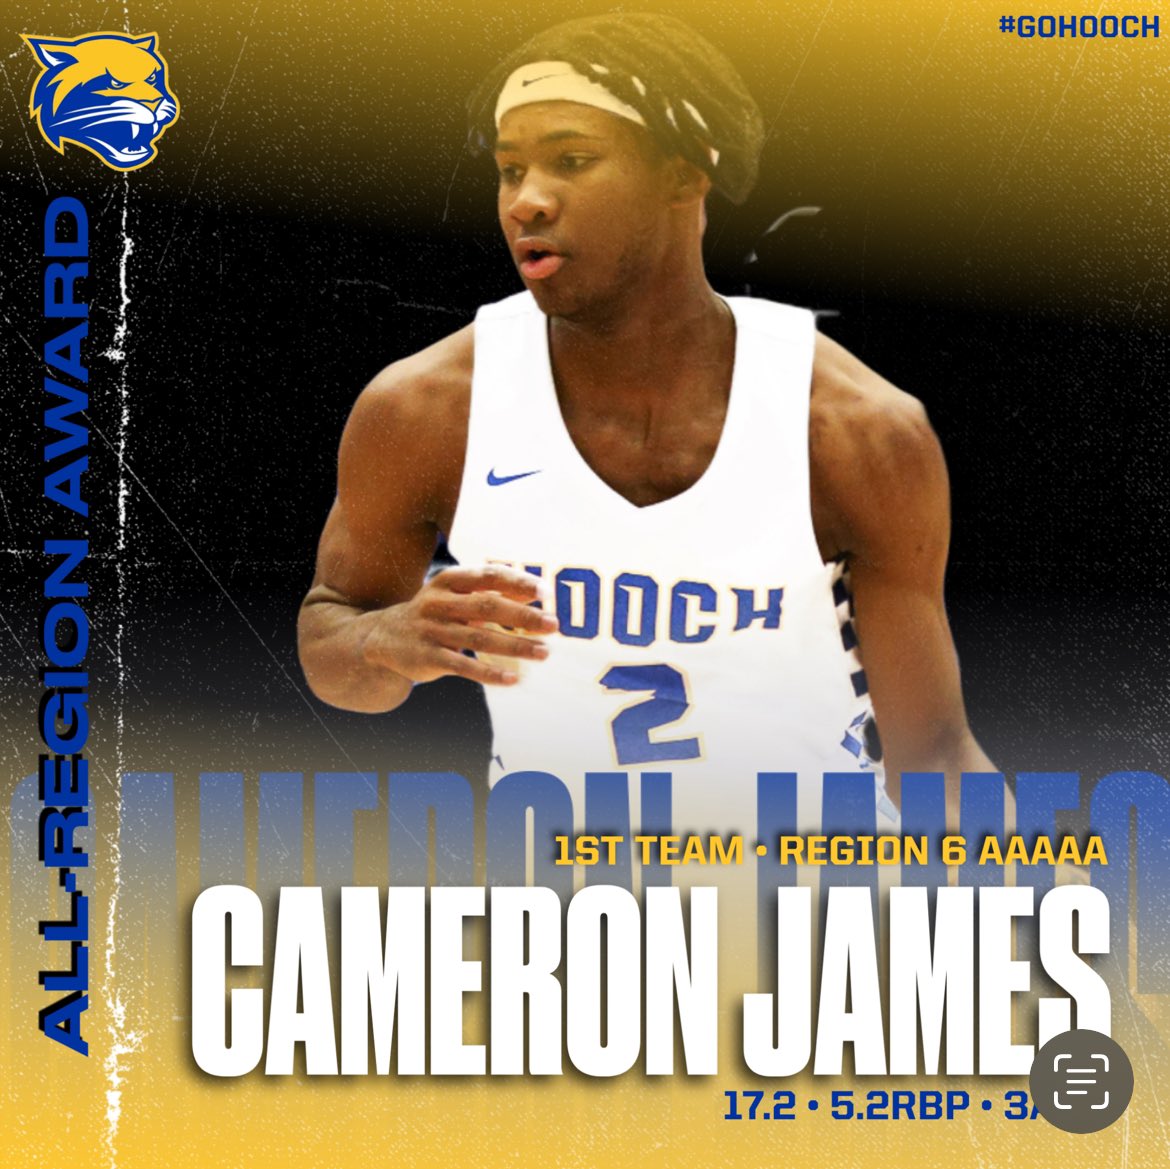 Congrats to @camjames_34 for 1st team all-region honors. The accolades continue to pile up😤